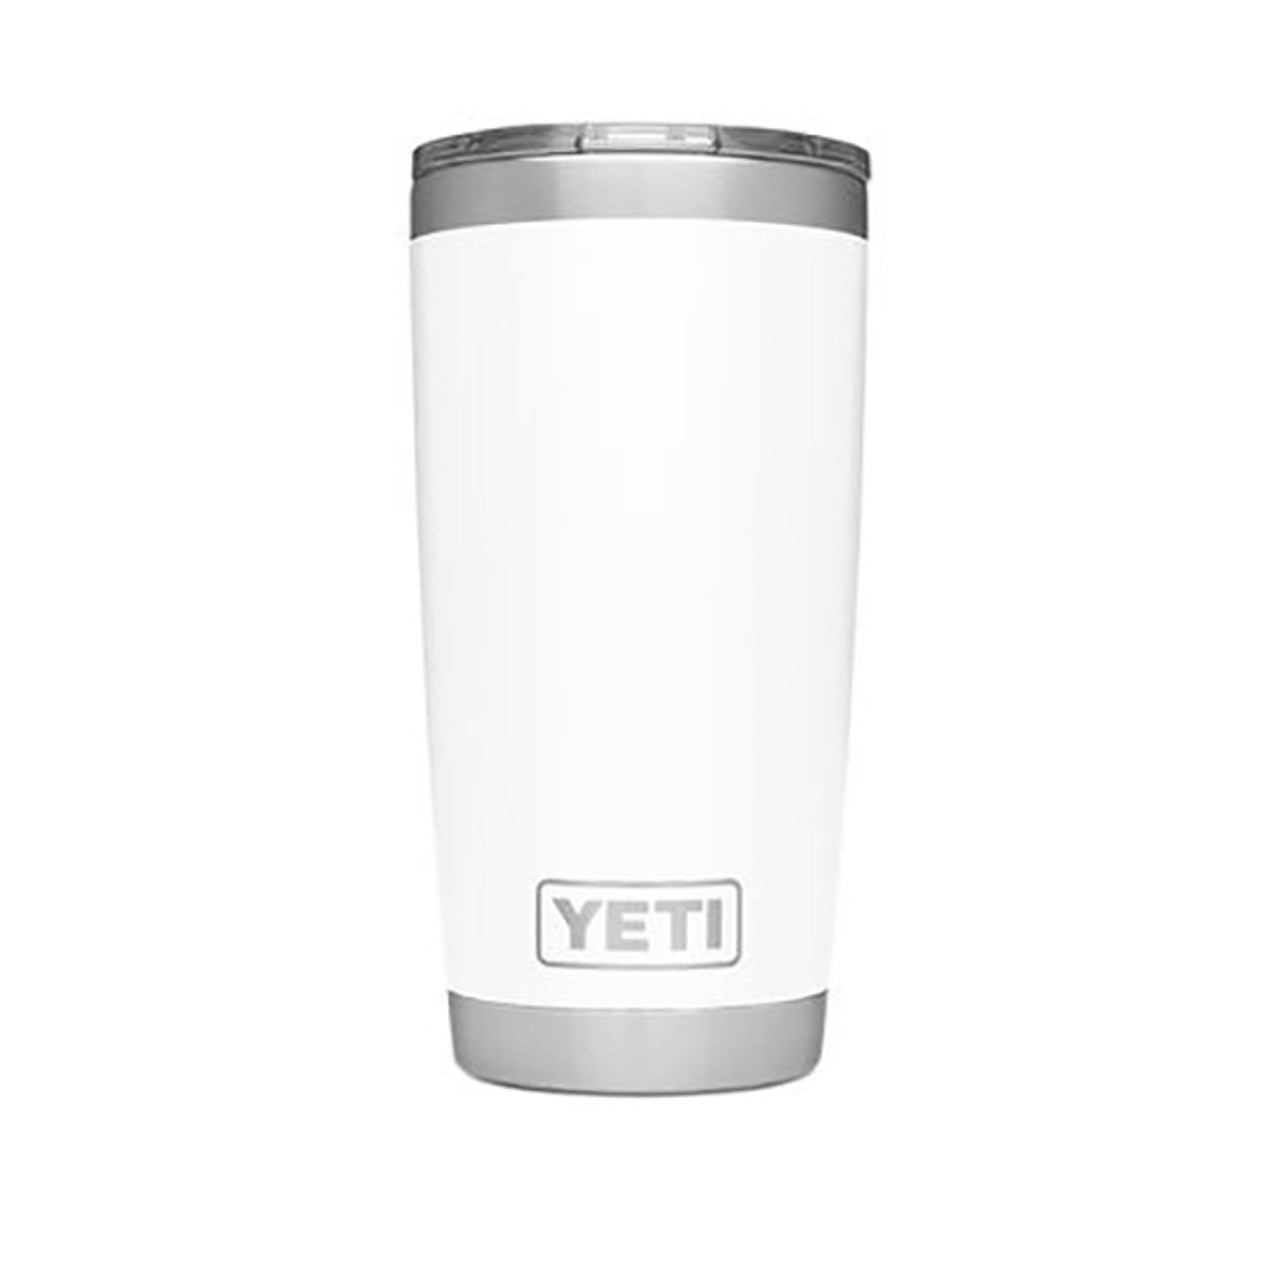 https://cdn11.bigcommerce.com/s-zut1msomd6/images/stencil/1280x1280/products/14944/174664/Yeti-Rambler-20-oz-Tumbler-with-Magslider-Lid-White__S_1__29094.1616183482.jpg?c=1